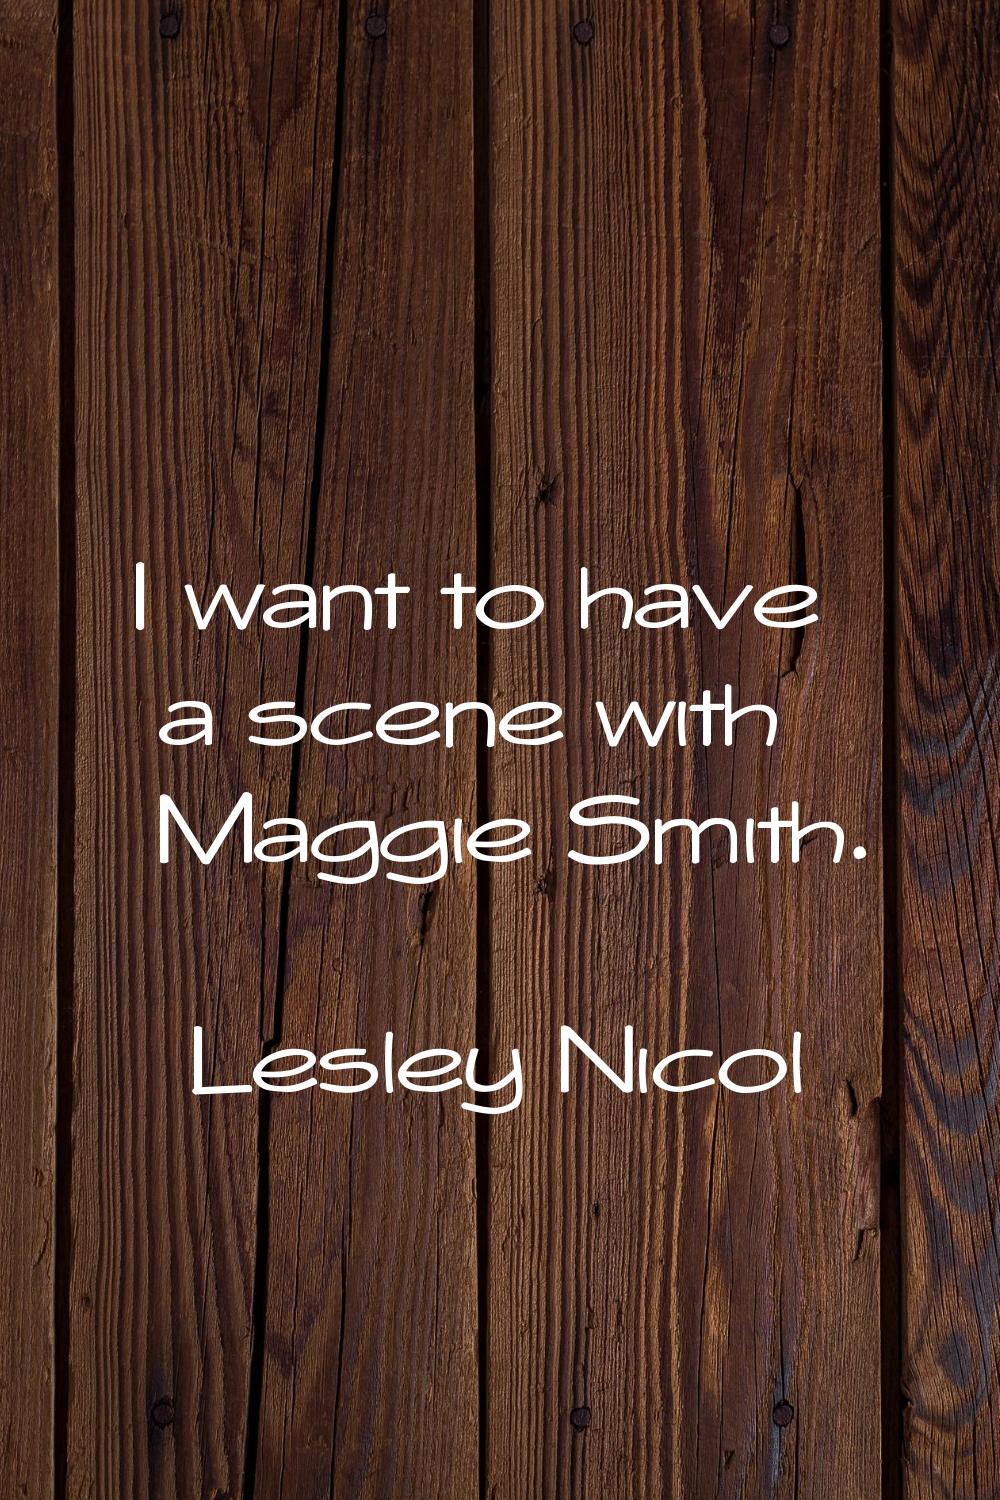 I want to have a scene with Maggie Smith.